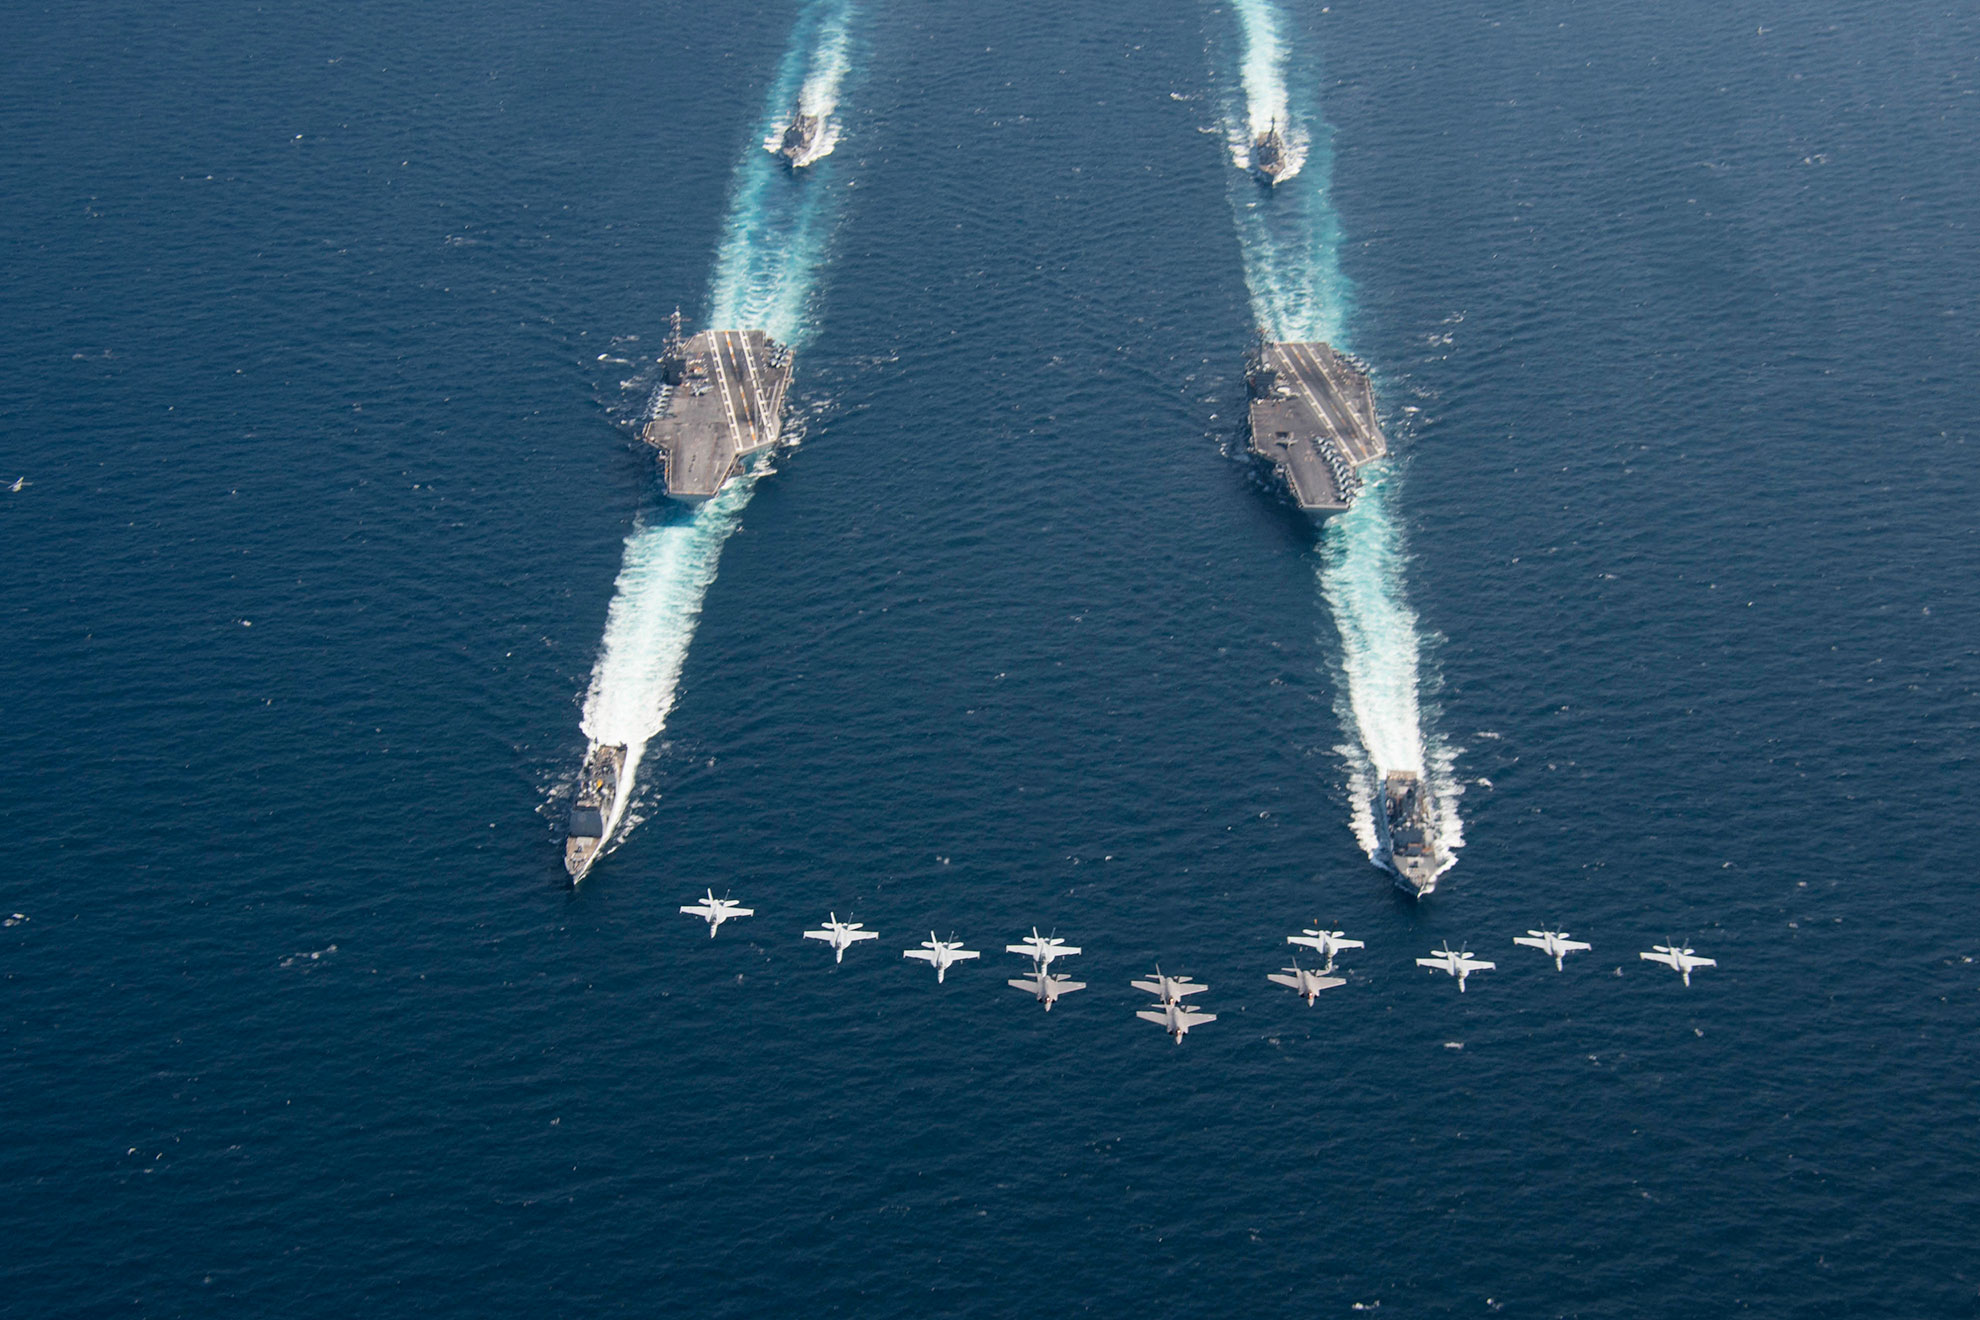 Atlantic Ocean (Aug. 30, 2018) Aircraft from the Freedom Fighters of Carrier Air Wing 7 fly in formation above the Nimitz-class aircraft carriers USS Abraham Lincoln (CVN 72) and USS Harry S. Truman (CVN 75); the Arleigh Burke-class guided-missile destroyer USS Mason (DDG 87) from Destroyer Squadron 2; the Arleigh Burke-class guided-missile destroyers USS Forrest Sherman (DDG 98) and USS Arleigh Burke (DDG 51) from Destroyer Squadron 28; and the Ticonderoga-class guided-missile cruiser USS Normandy (CG 60) while transiting the Atlantic Ocean. The USS Abraham Lincoln Carrier Strike Group and USS Harry S. Truman Carrier Strike Group are participating in dual-carrier sustainment and qualification operations in the Atlantic Ocean -- U.S. Navy photo by MCS1 Brian M. Brooks. -